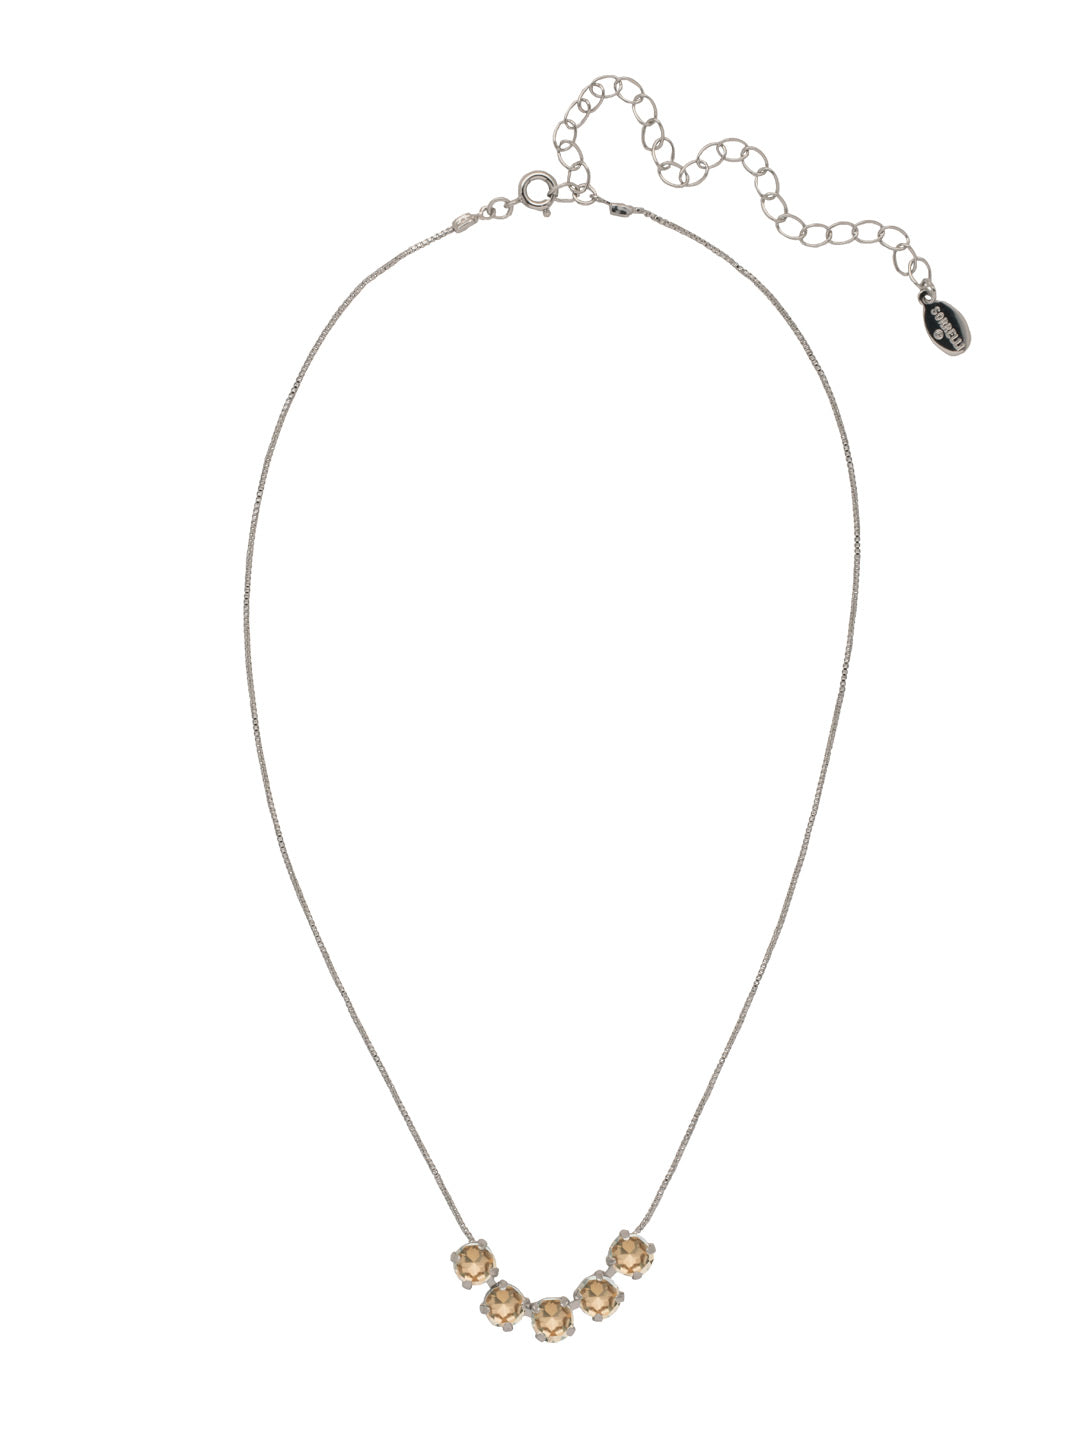 Shaughna Tennis Necklace - NFC84PDDCH - <p>The Shaughna Tennis Necklace features five crystals on a delicate adjustable chain. From Sorrelli's Dark Champagne collection in our Palladium finish.</p>